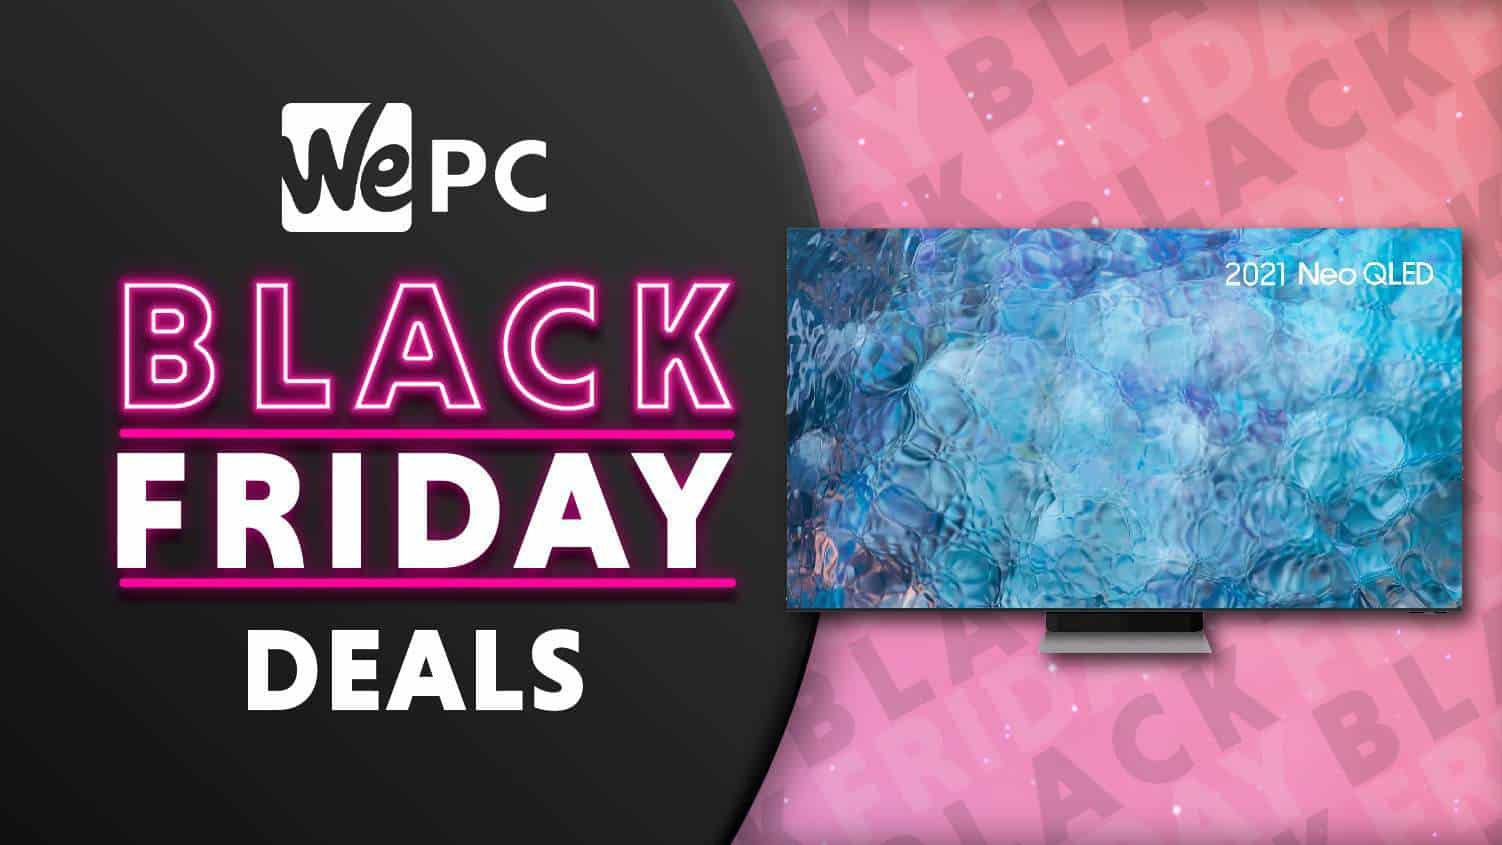 Save up to $1700 on Samsung QLED early Black Friday 2021 deals